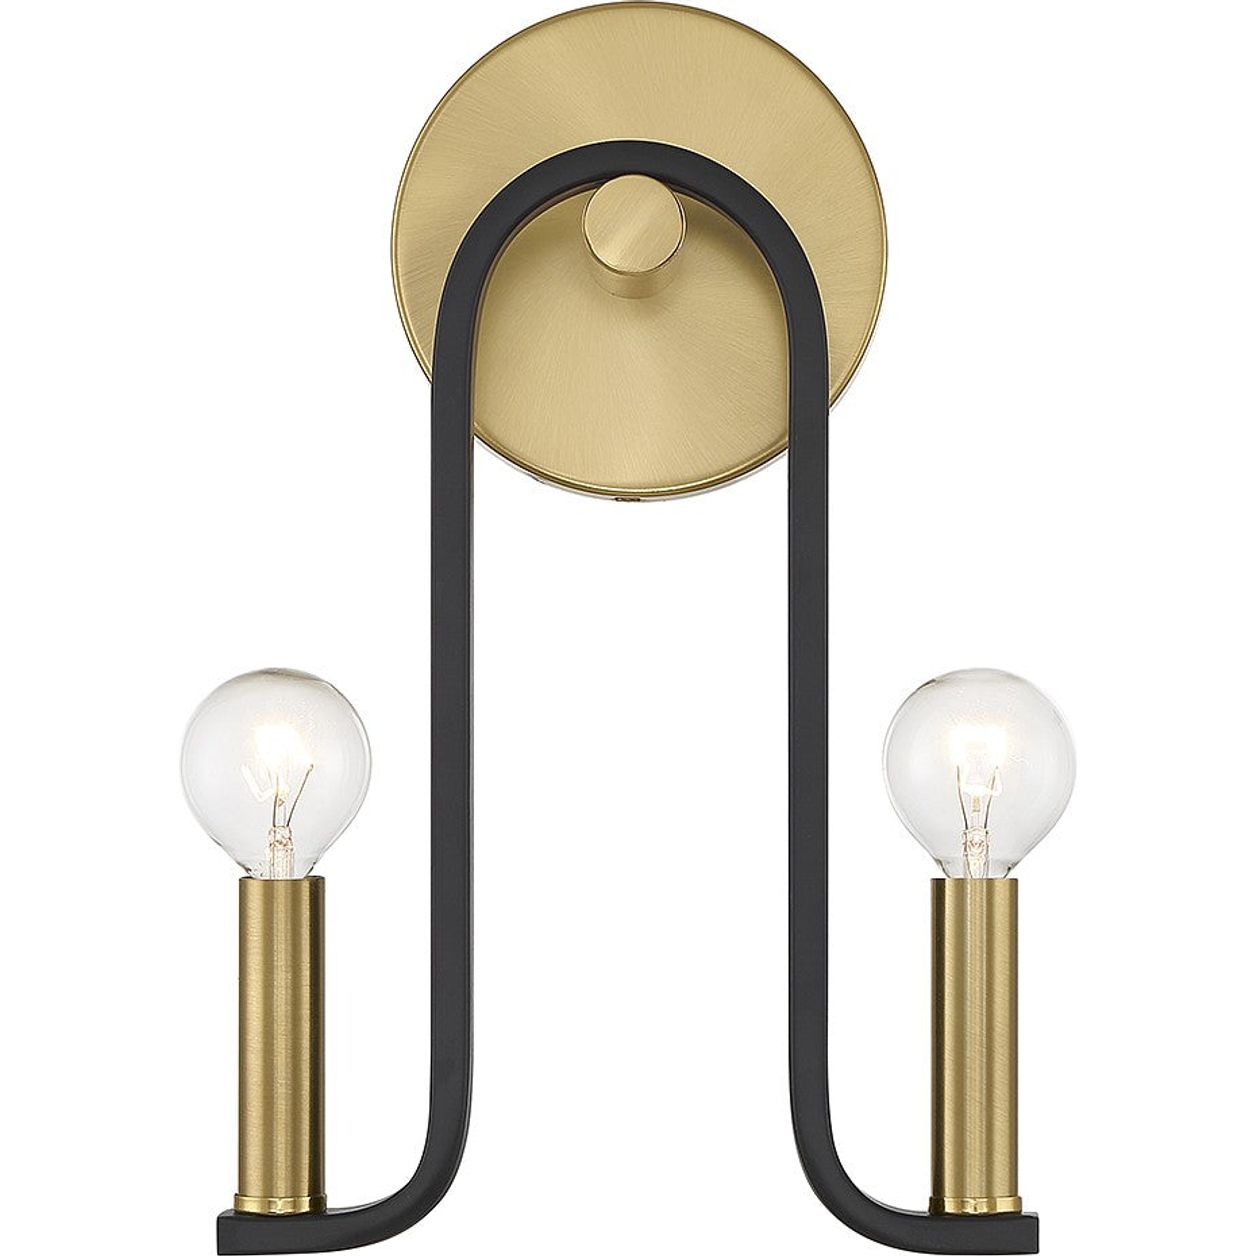 Savoy House - 9-5531-2-143 - Two Light Wall Sconce - Archway - Matte Black with Warm Brass